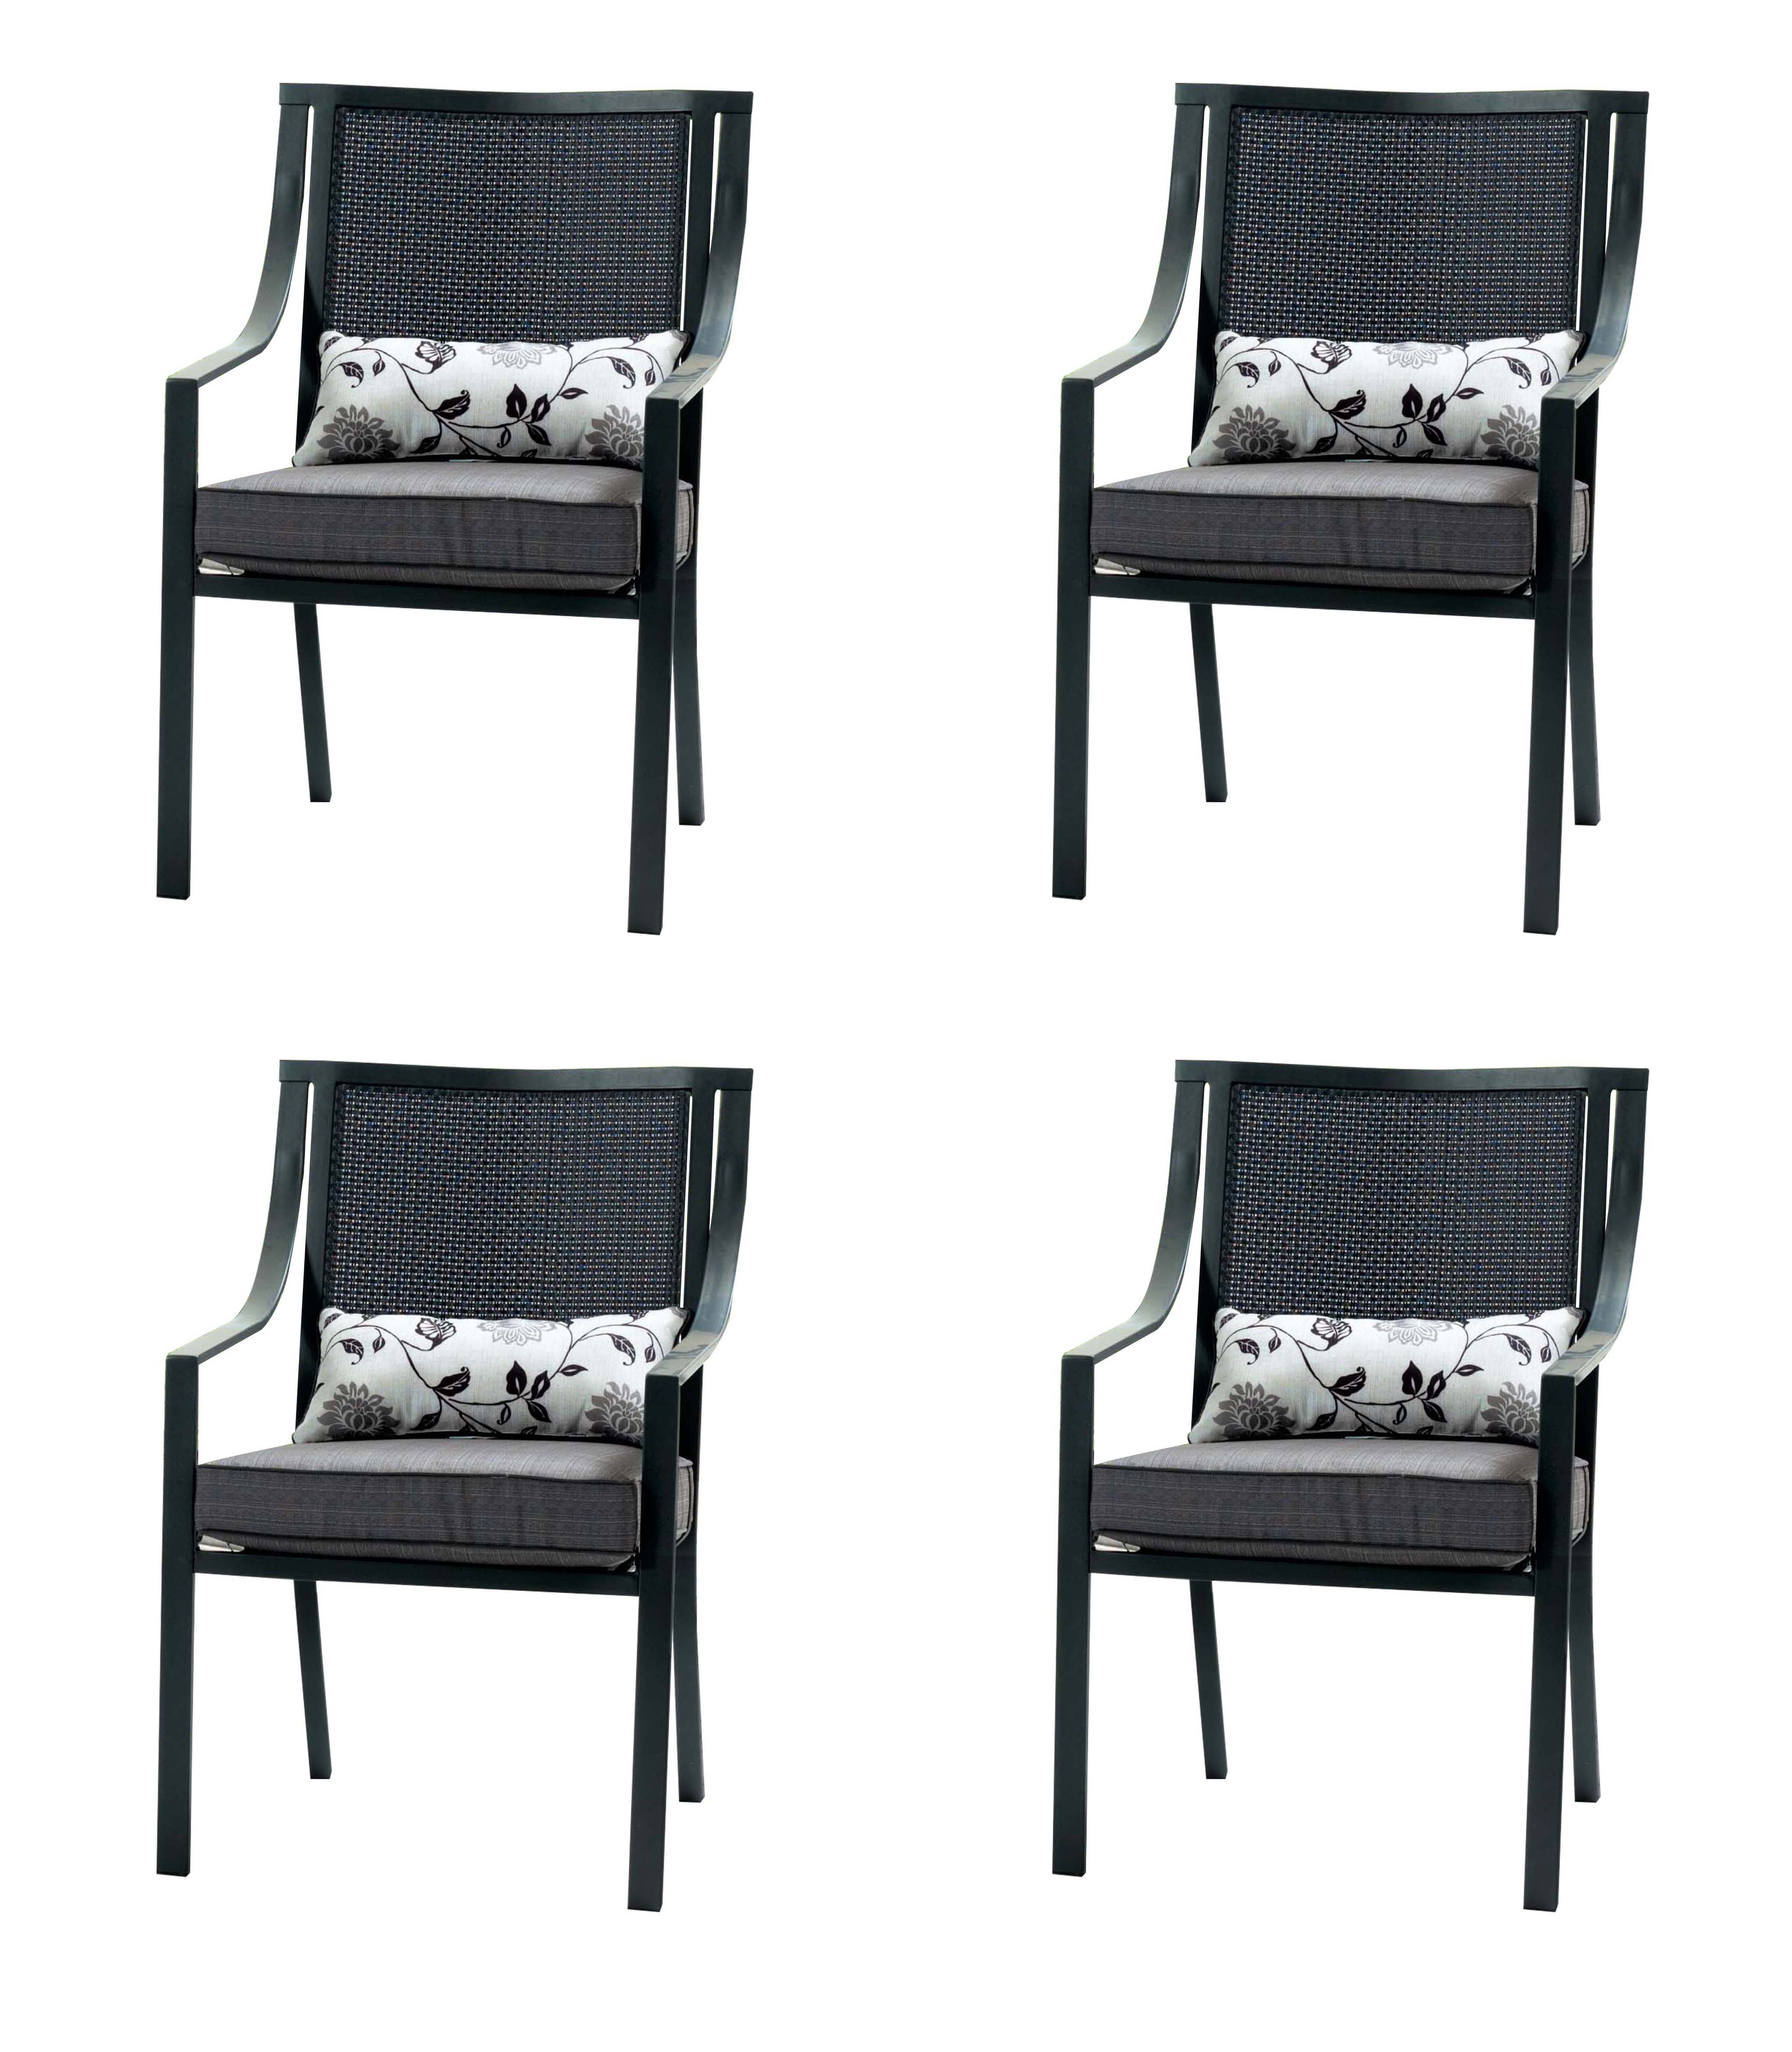 Mainstays Alexandra Square Outdoor Patio Dining Set, Cushioned Metal 5 Piece, Grey - image 5 of 9